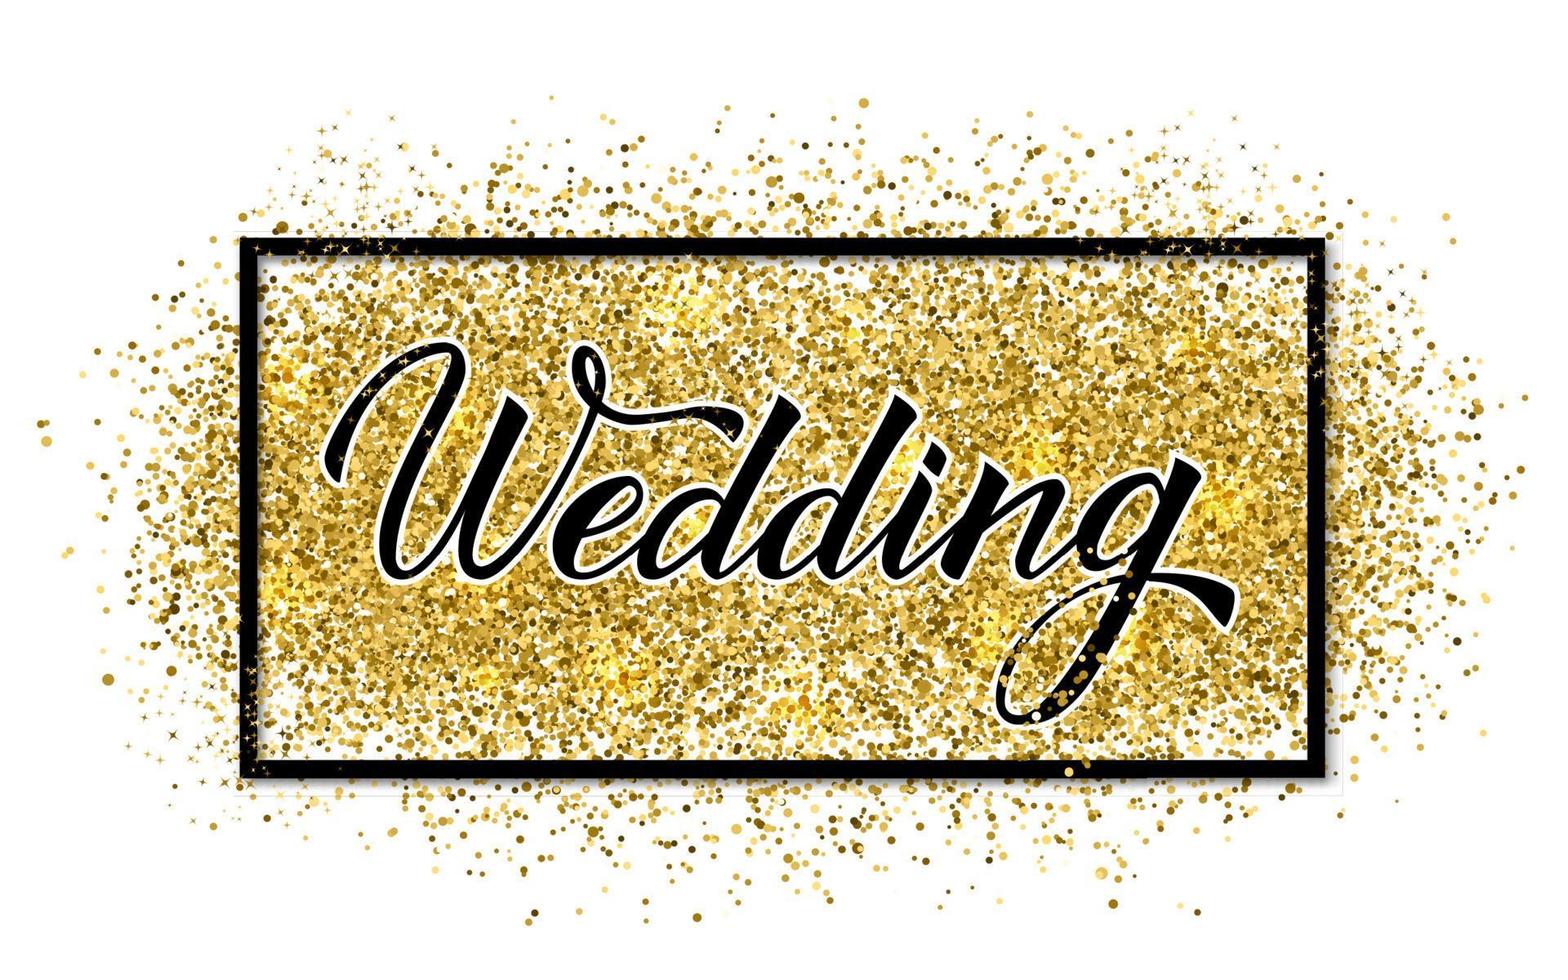 Wedding Hand written with brush calligraphy lettering on shiny gold glitter texture background. Retro wedding reception sign. Easy to edit vector template